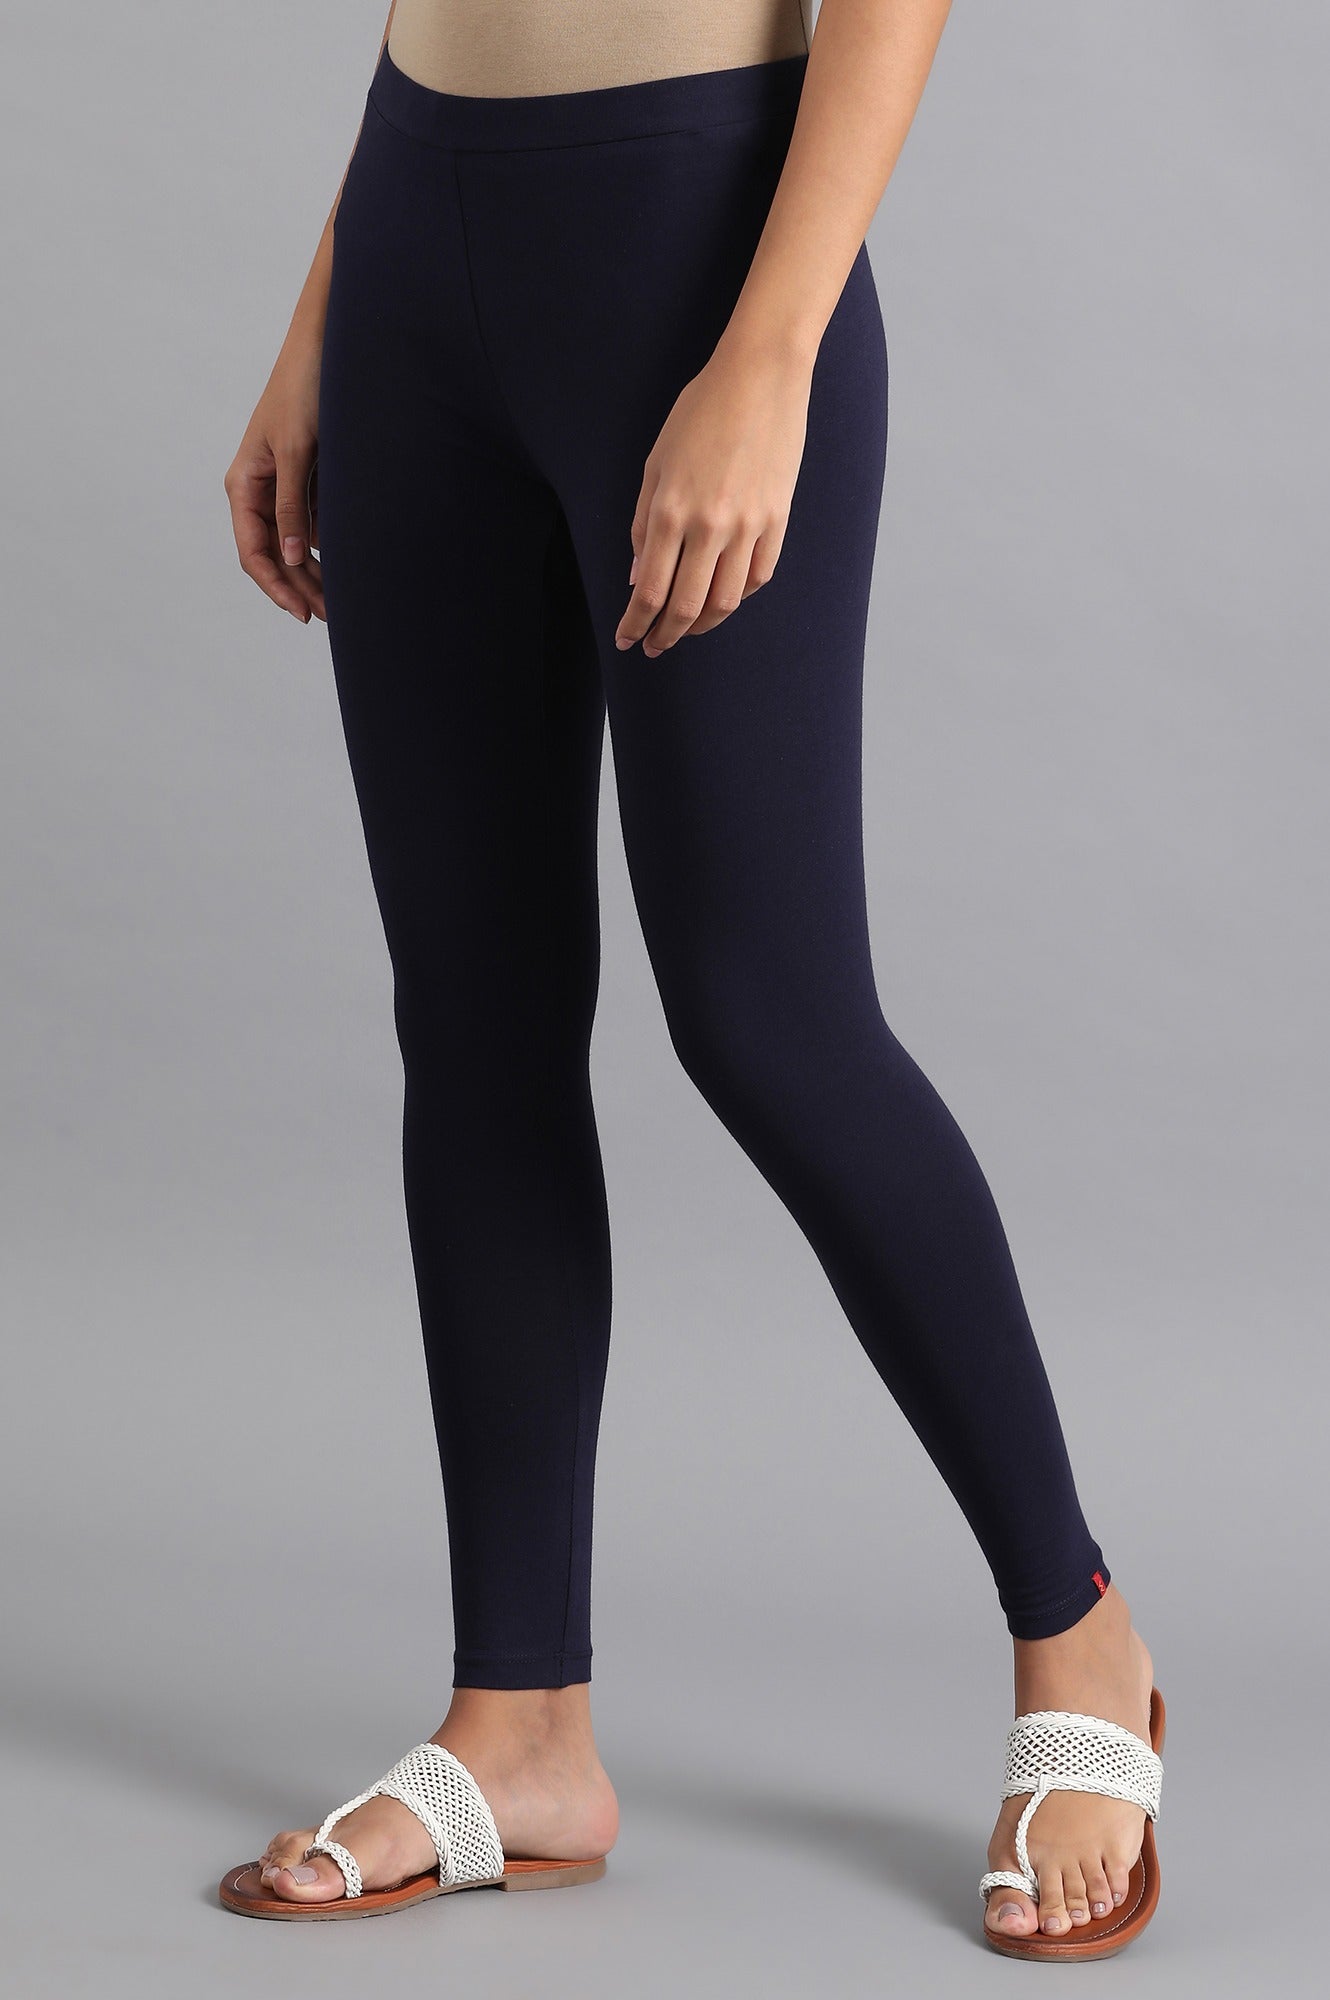 Navy Blue Solid Tights